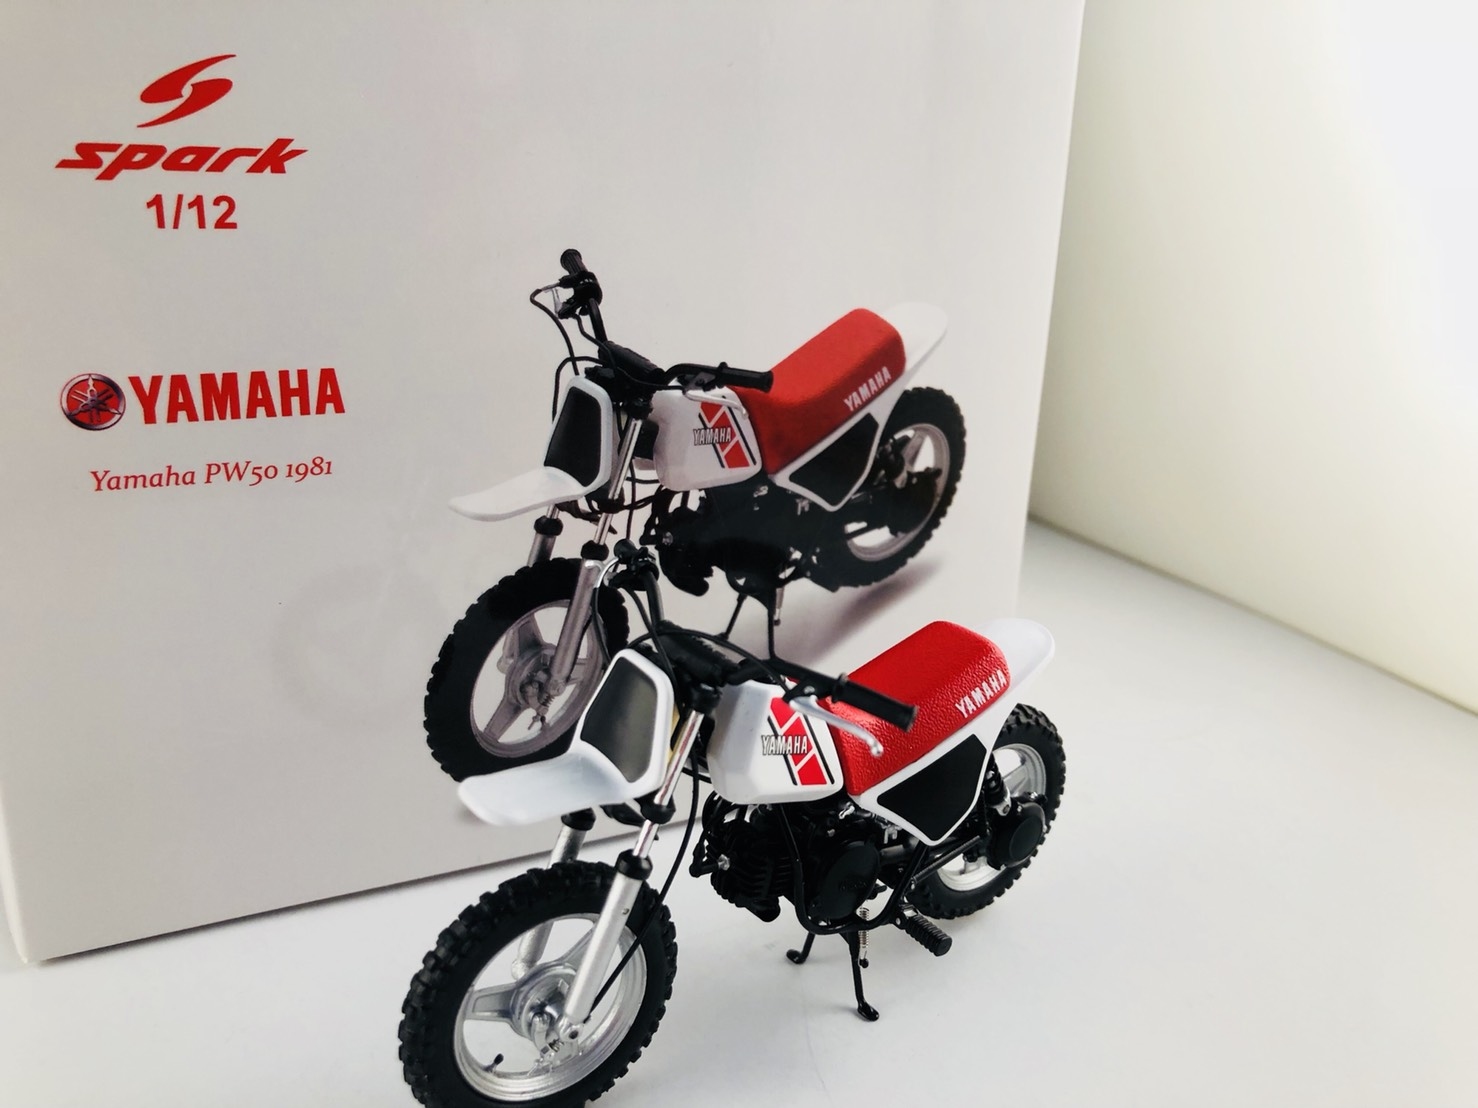 1:12 Spark yamaha pw50 1981 White/Red 